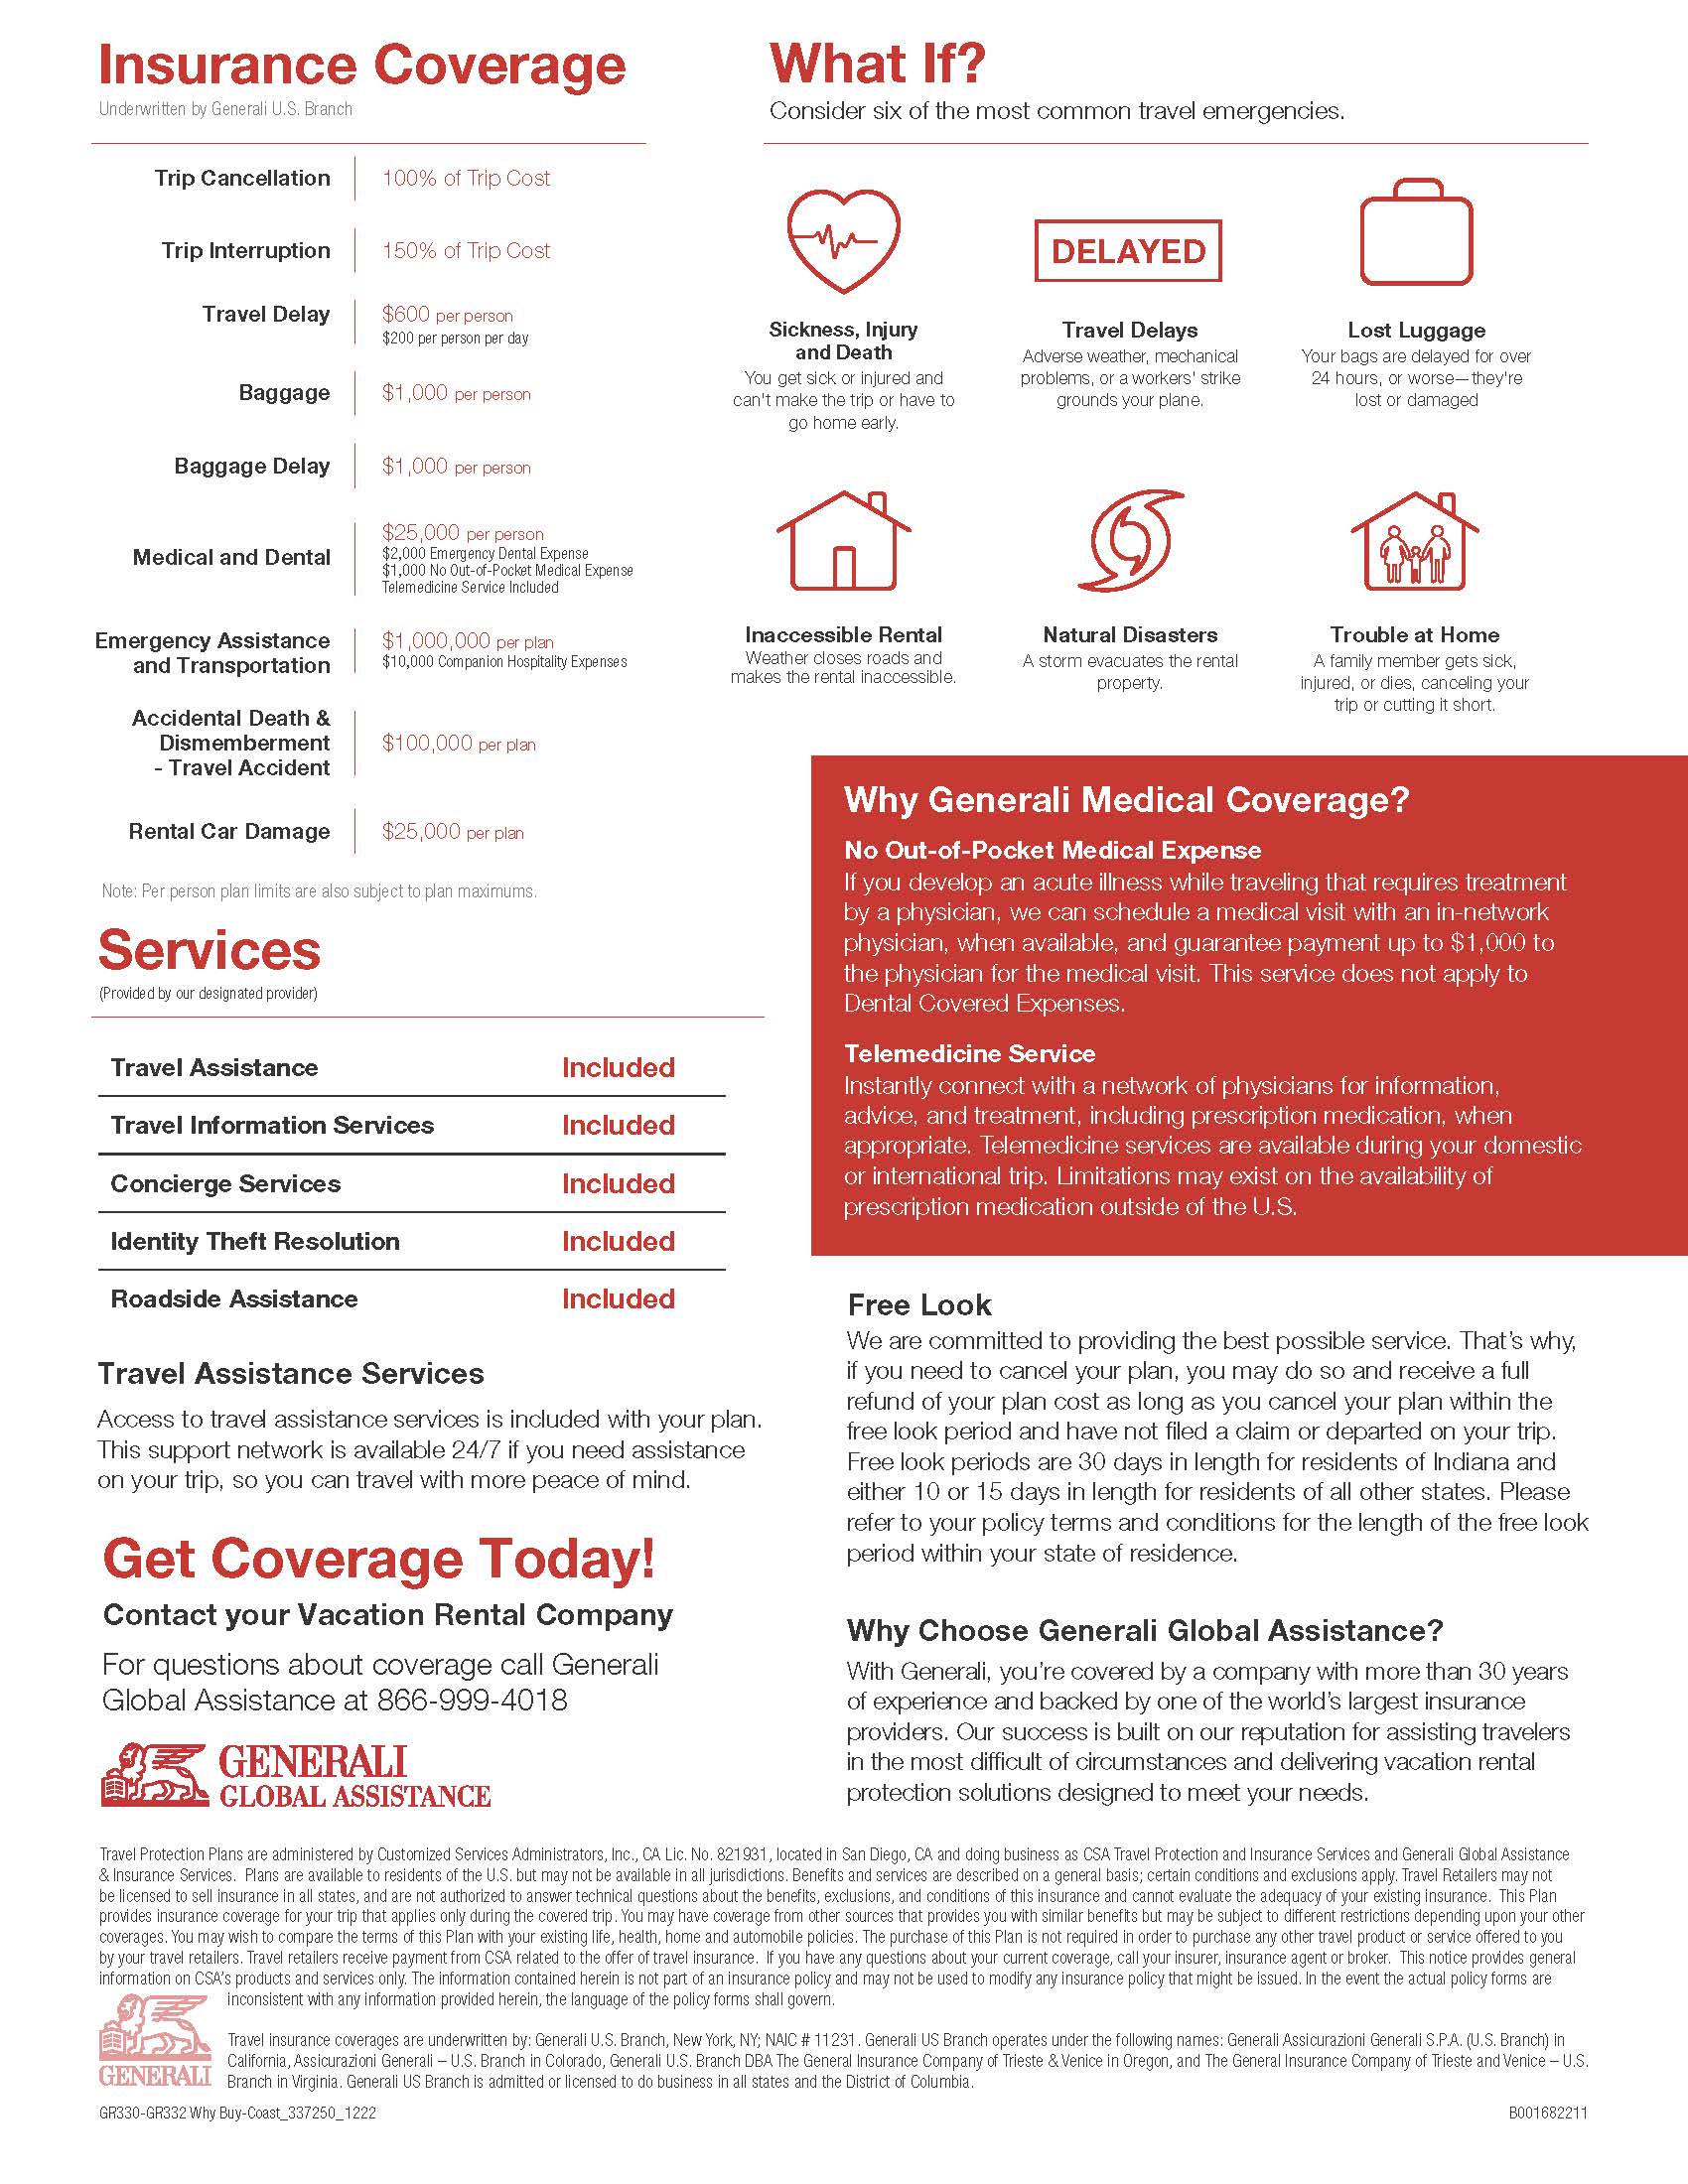 Insurance Coverage page 2